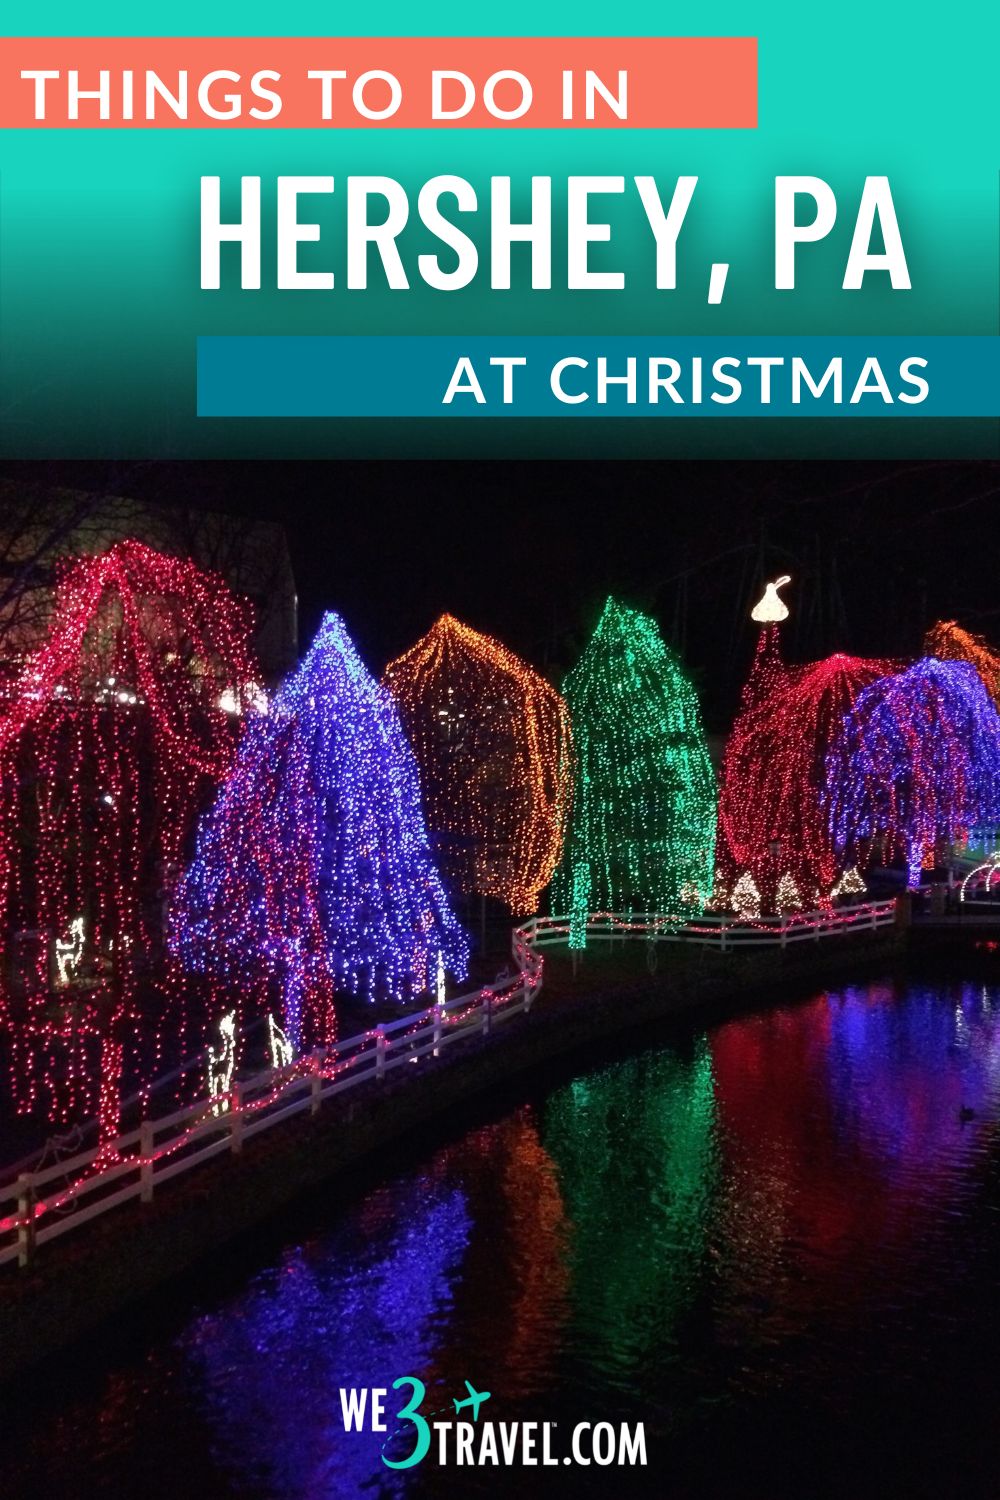 Things to do in Hershey, PA at Christmas including Hersheypark Christmas Candylane, Sweet Lights, Hershey World, and more.